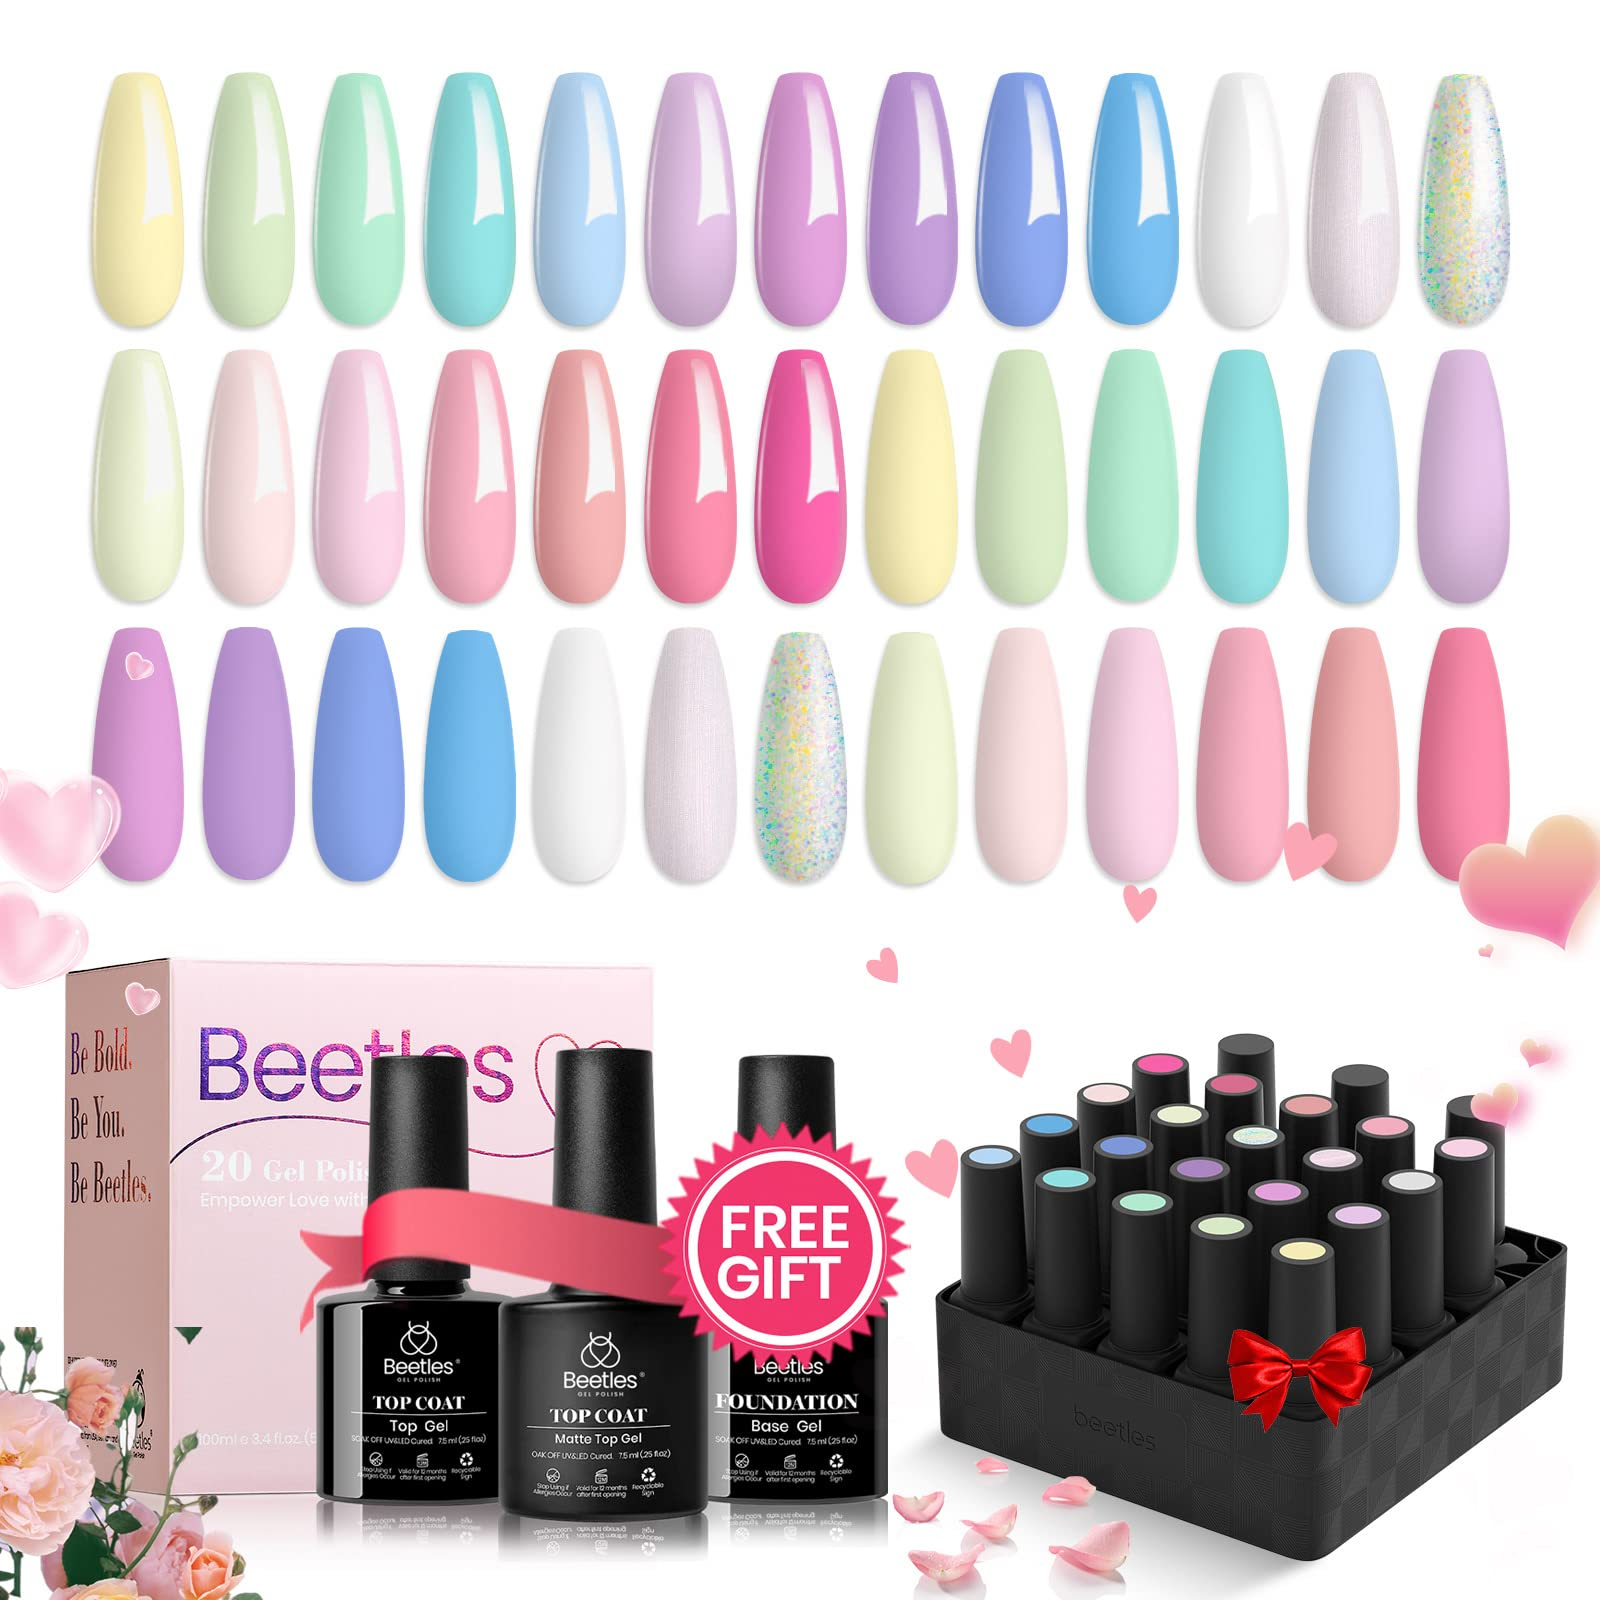 Beetles Gel Nail Polish Kit 20 Colors with Base Gel Glossy & Matte Top Coat, 2023 Spring Pastel Girly Colors Gel Polish Set Macaroon Bright Nail Art Solid Sparkle Glitters Colors Valentine Gift for Women